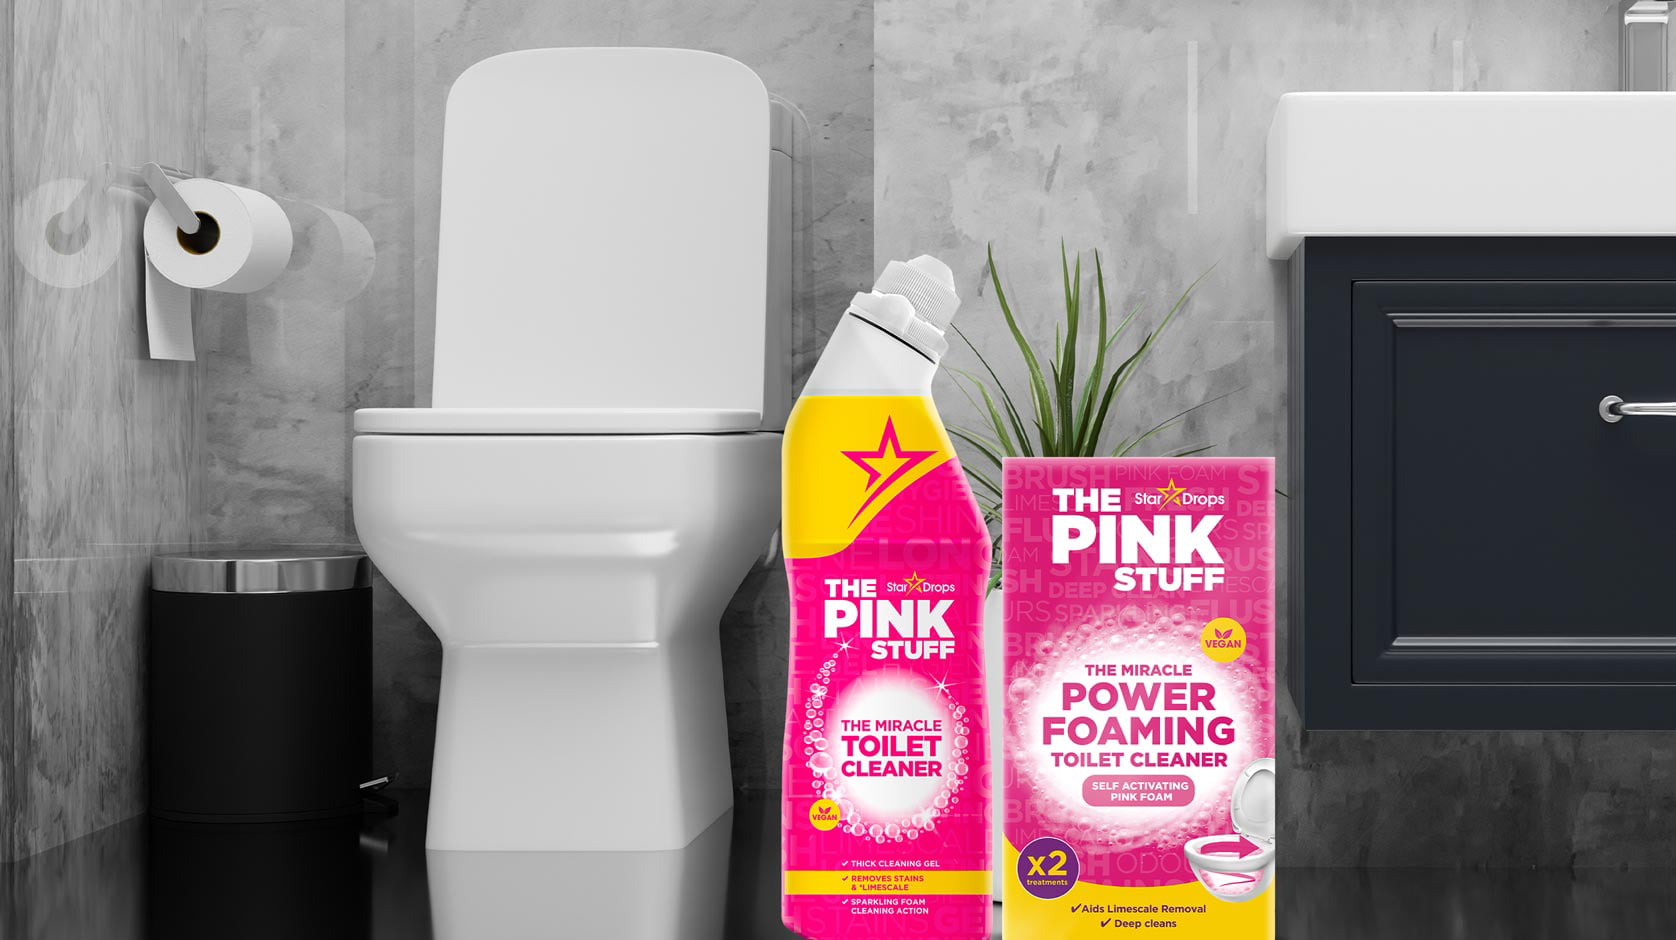 The Pink Stuff The Miracle Power Foaming Powder for Toilets Bathroom Cleaner - 7 oz